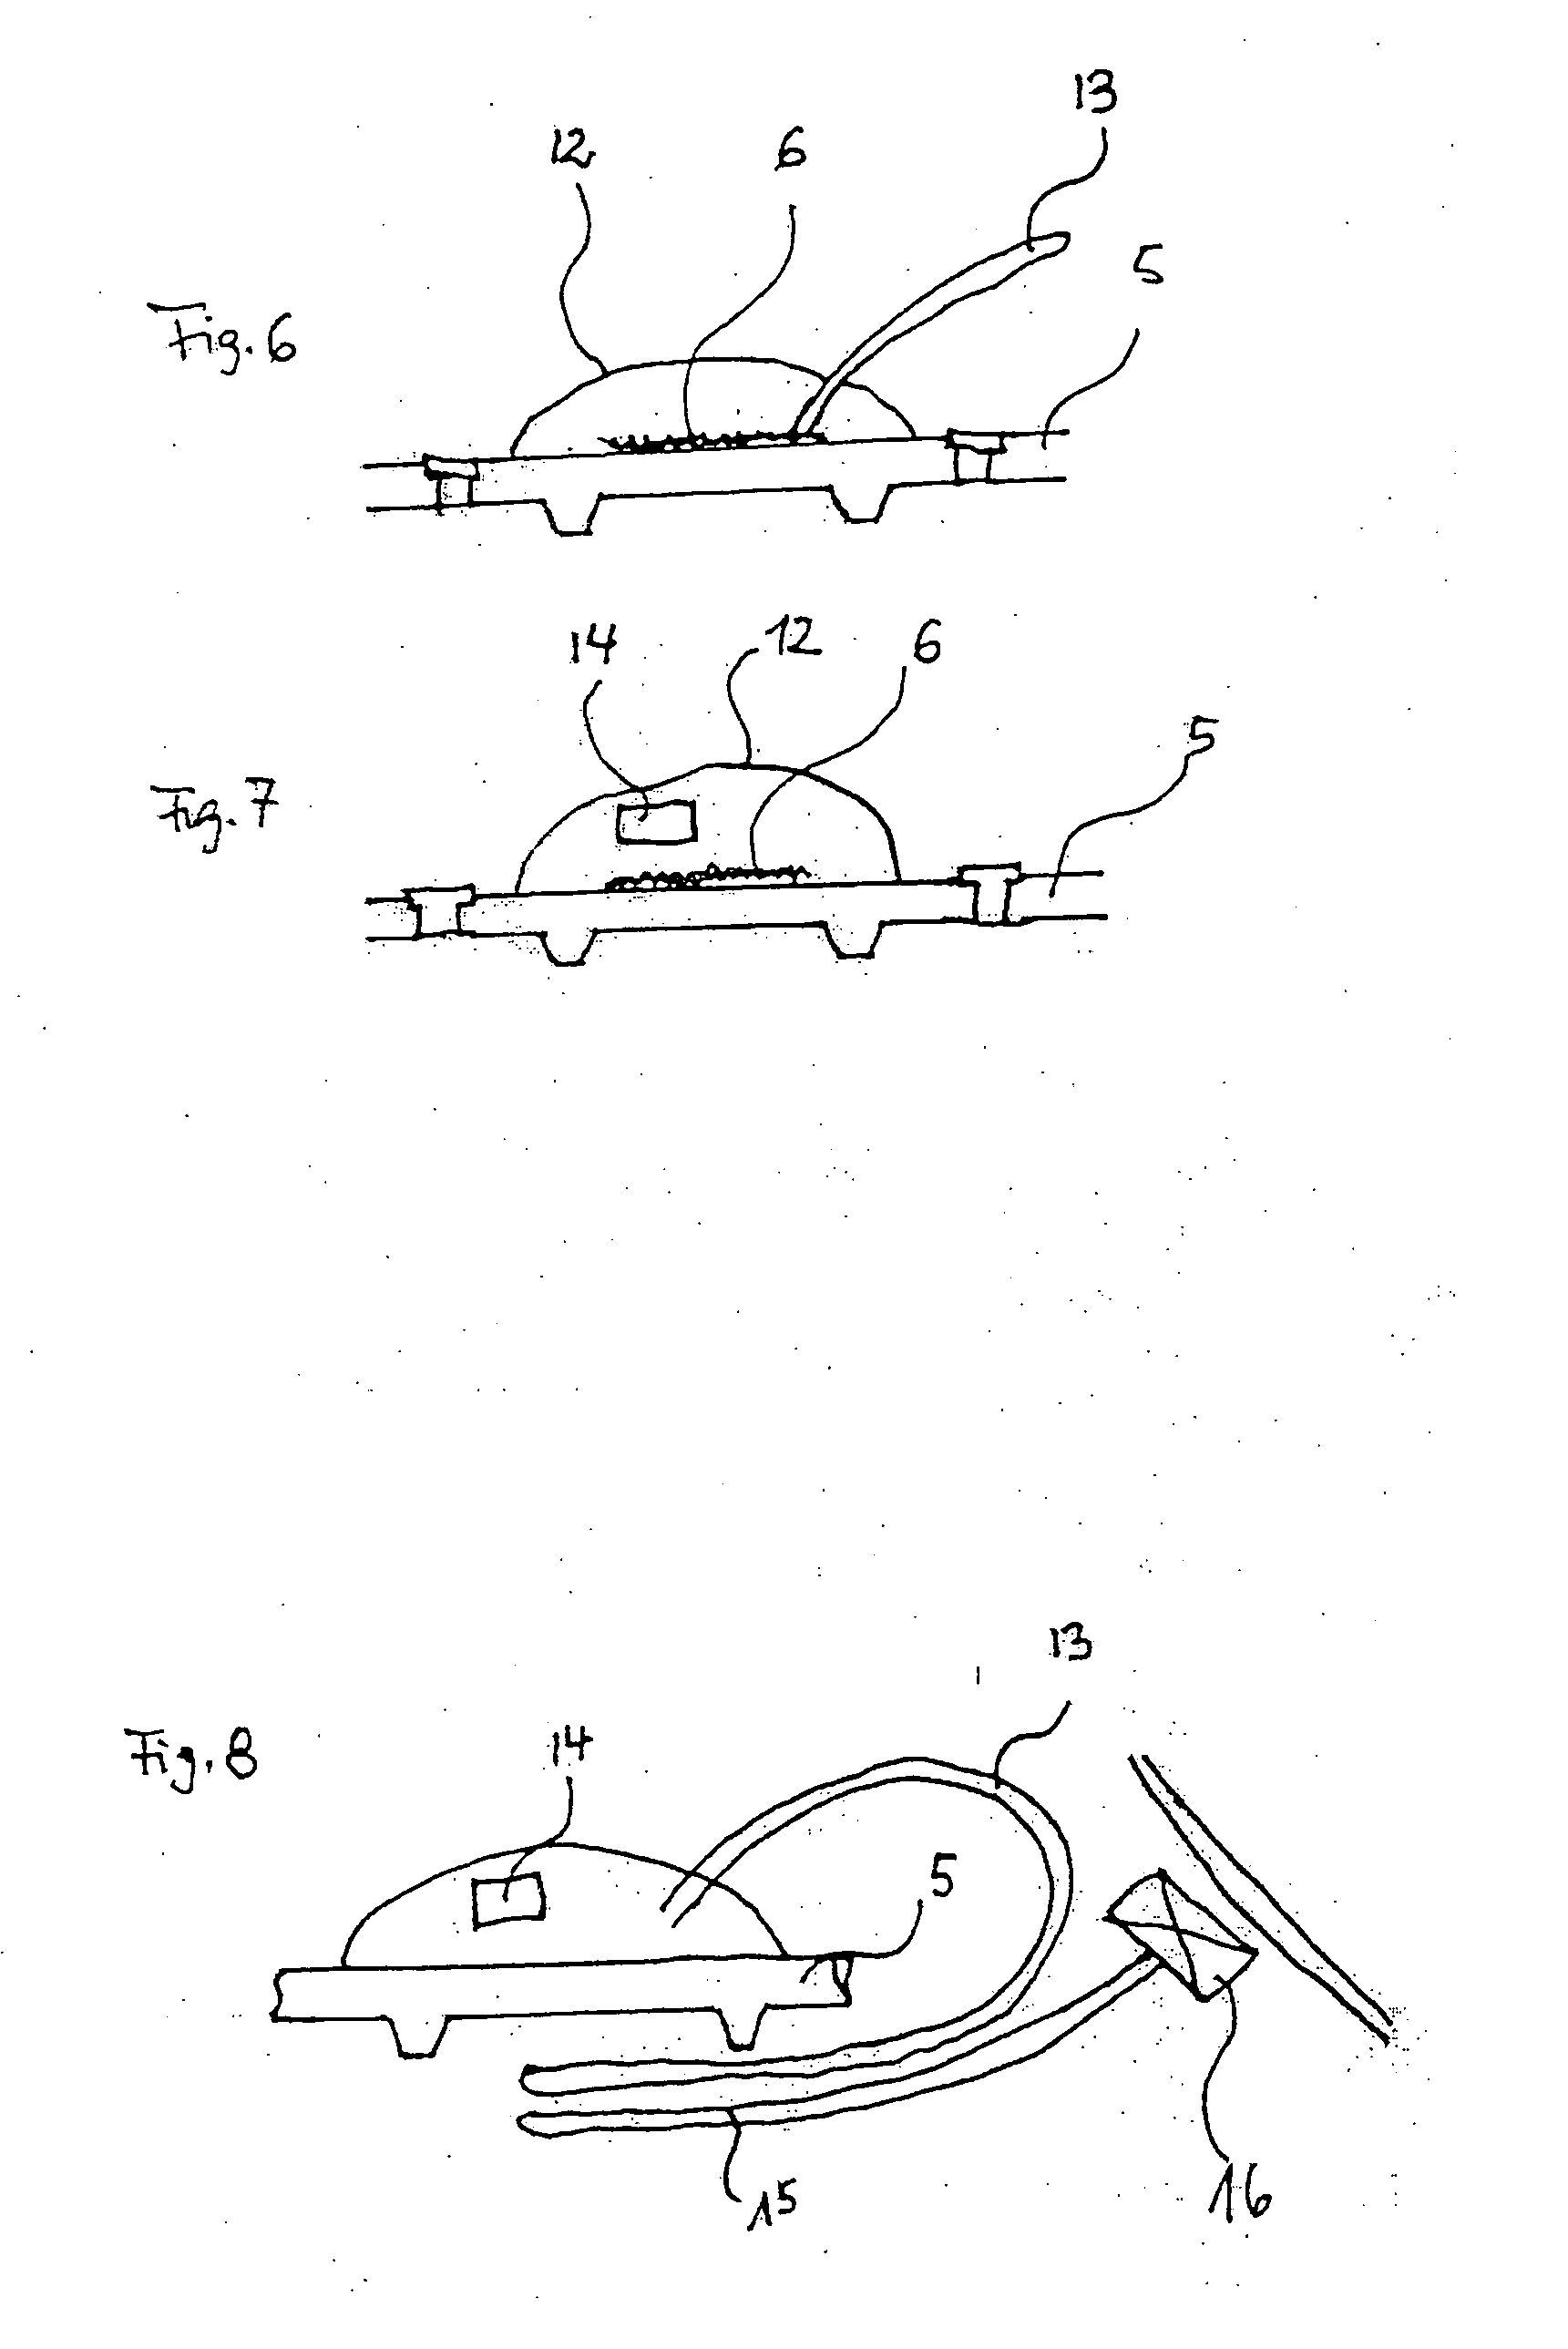 Fixation system for bones with a sensor and telemetry system